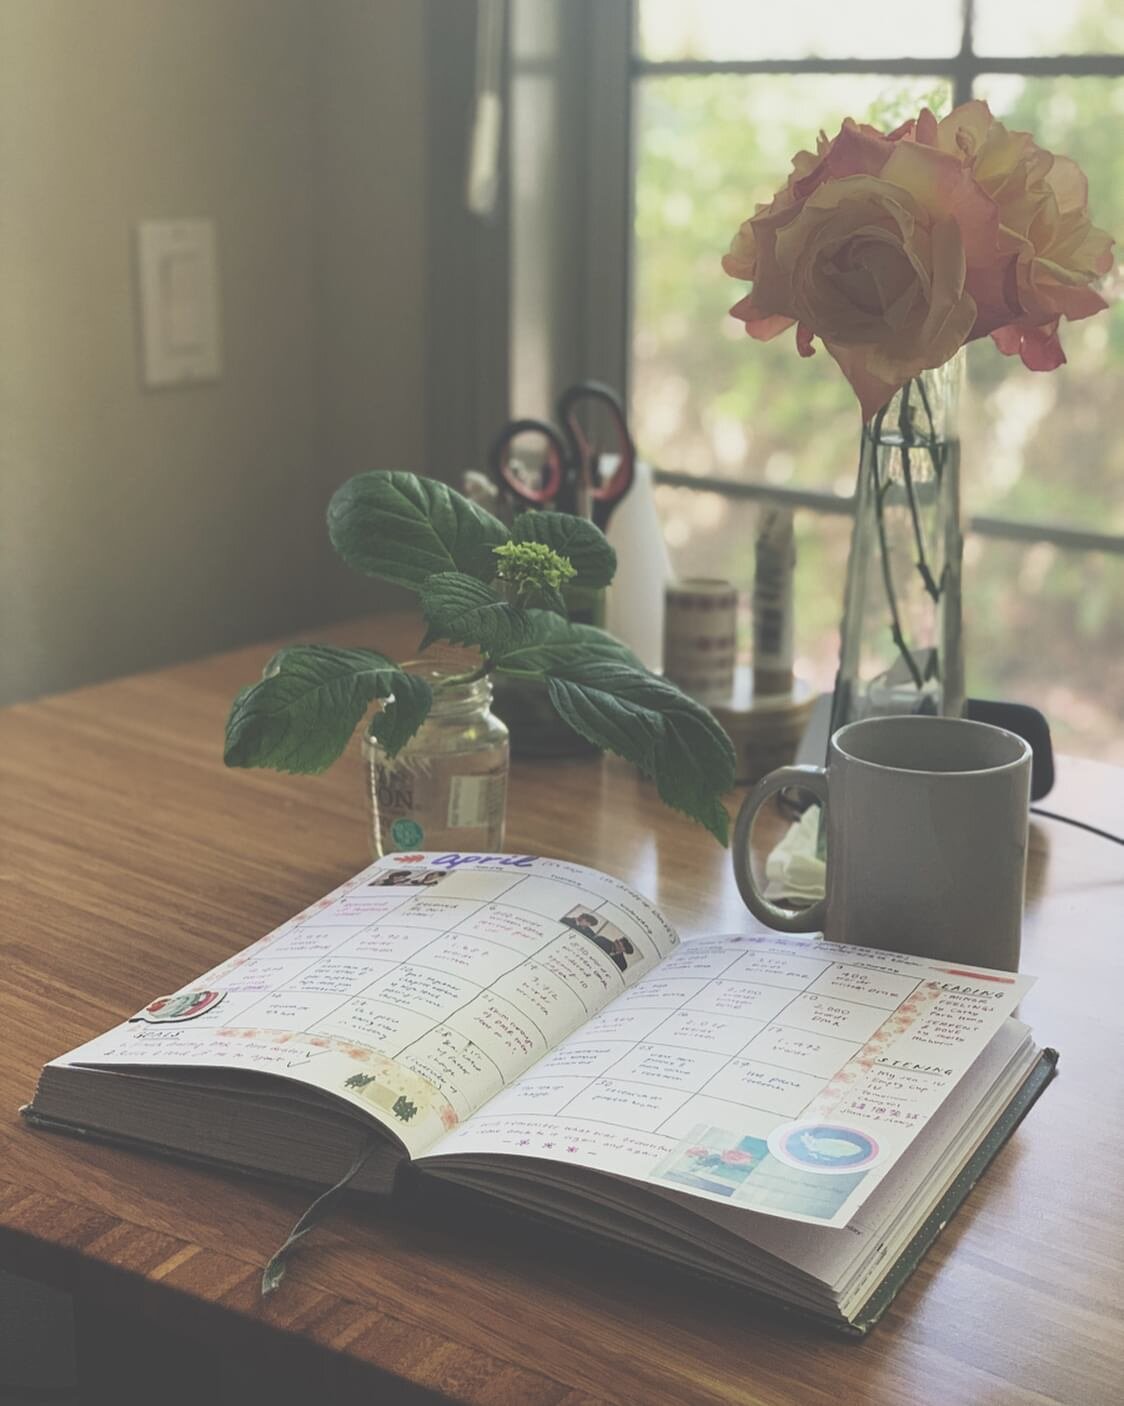 Looking back on April, I realize I follow the same trends in my writing habits, time and time again. 🕰 

I start slow when returning to an old project, and begin restless, drifting, unsure. I feel as if I&rsquo;ve lost the connection to the story, d